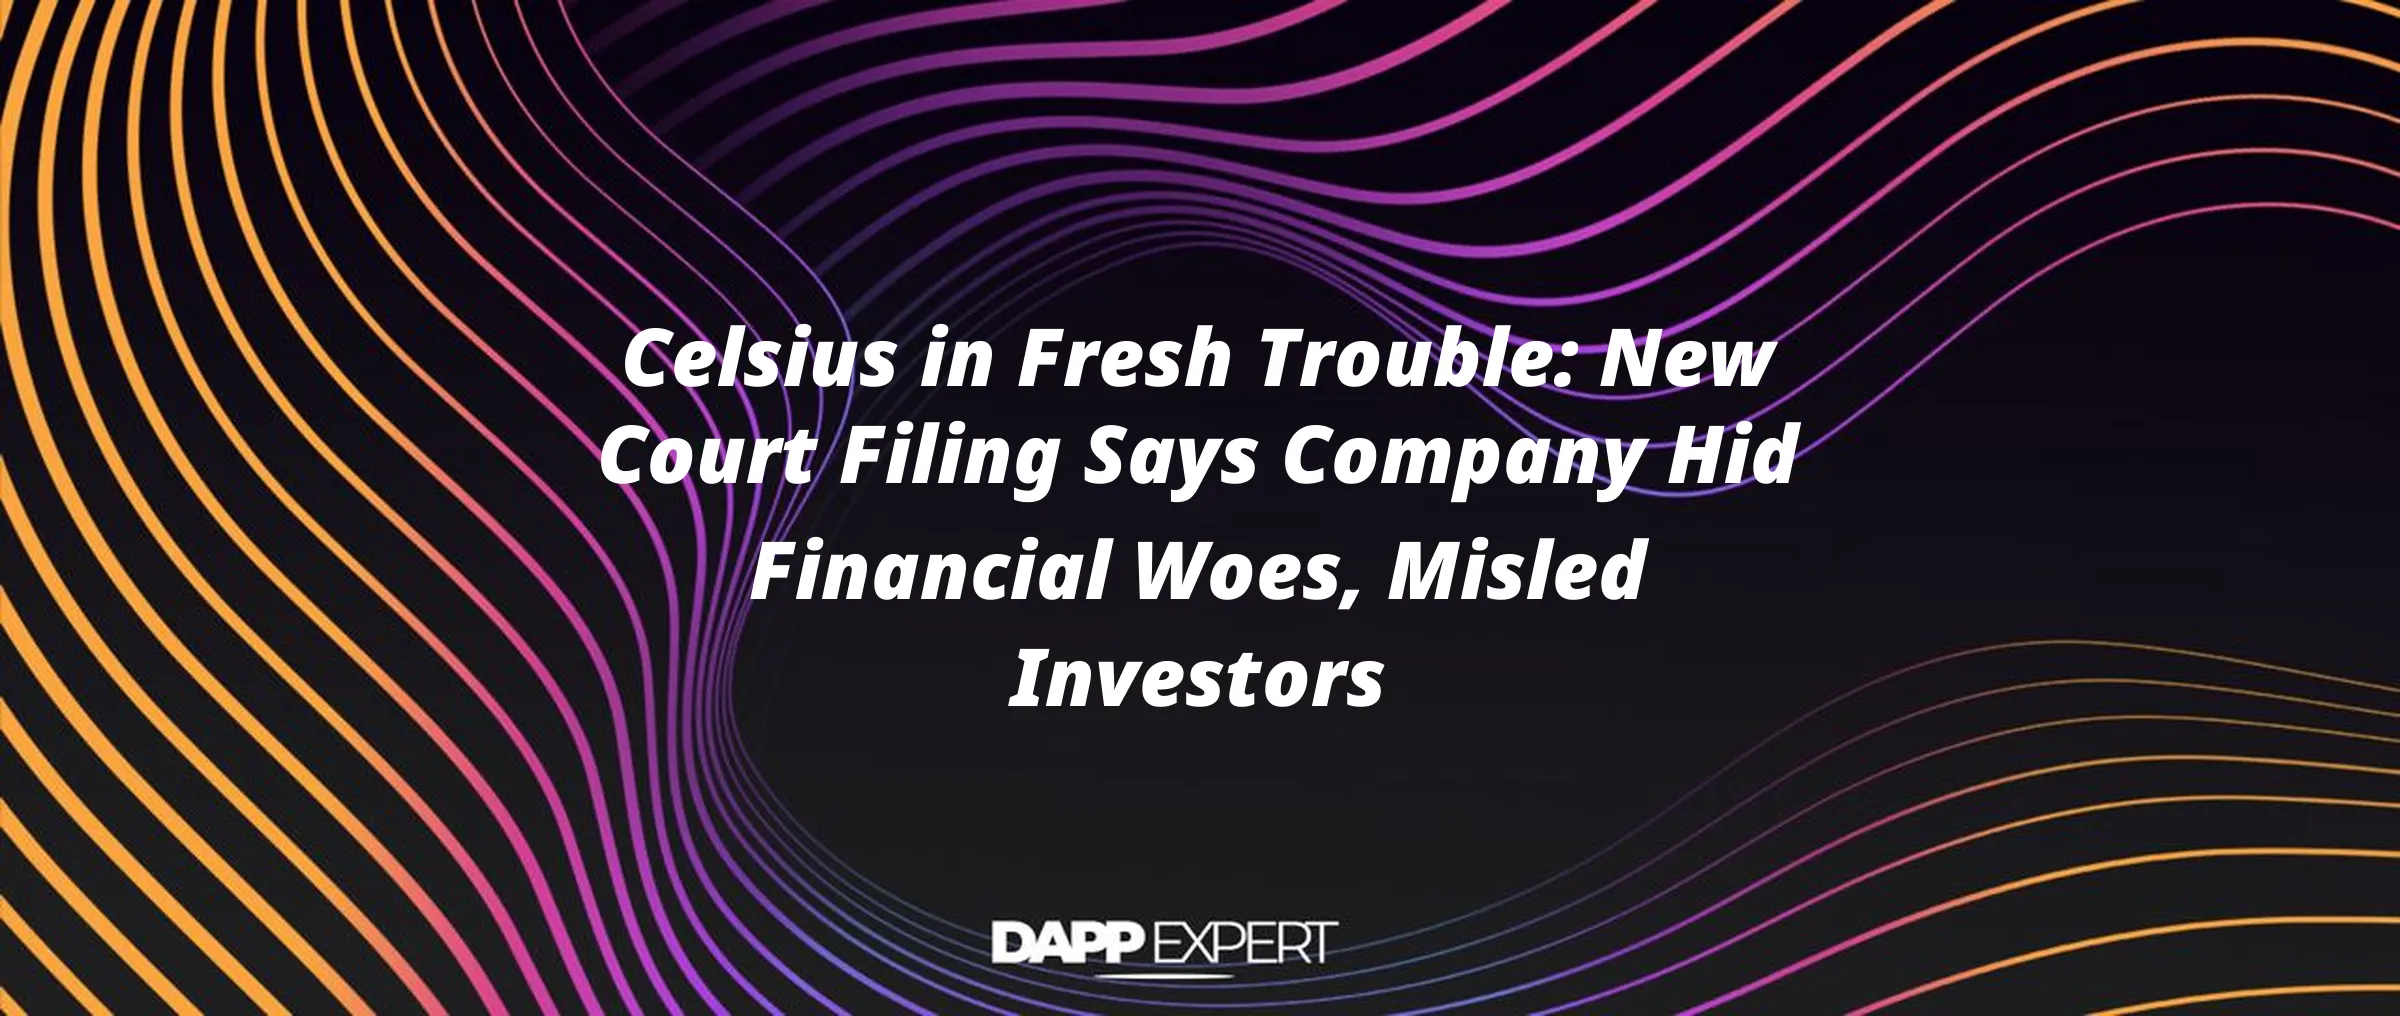 Celsius in Fresh Trouble: New Court Filing Says Company Hid Financial Woes, Misled Investors